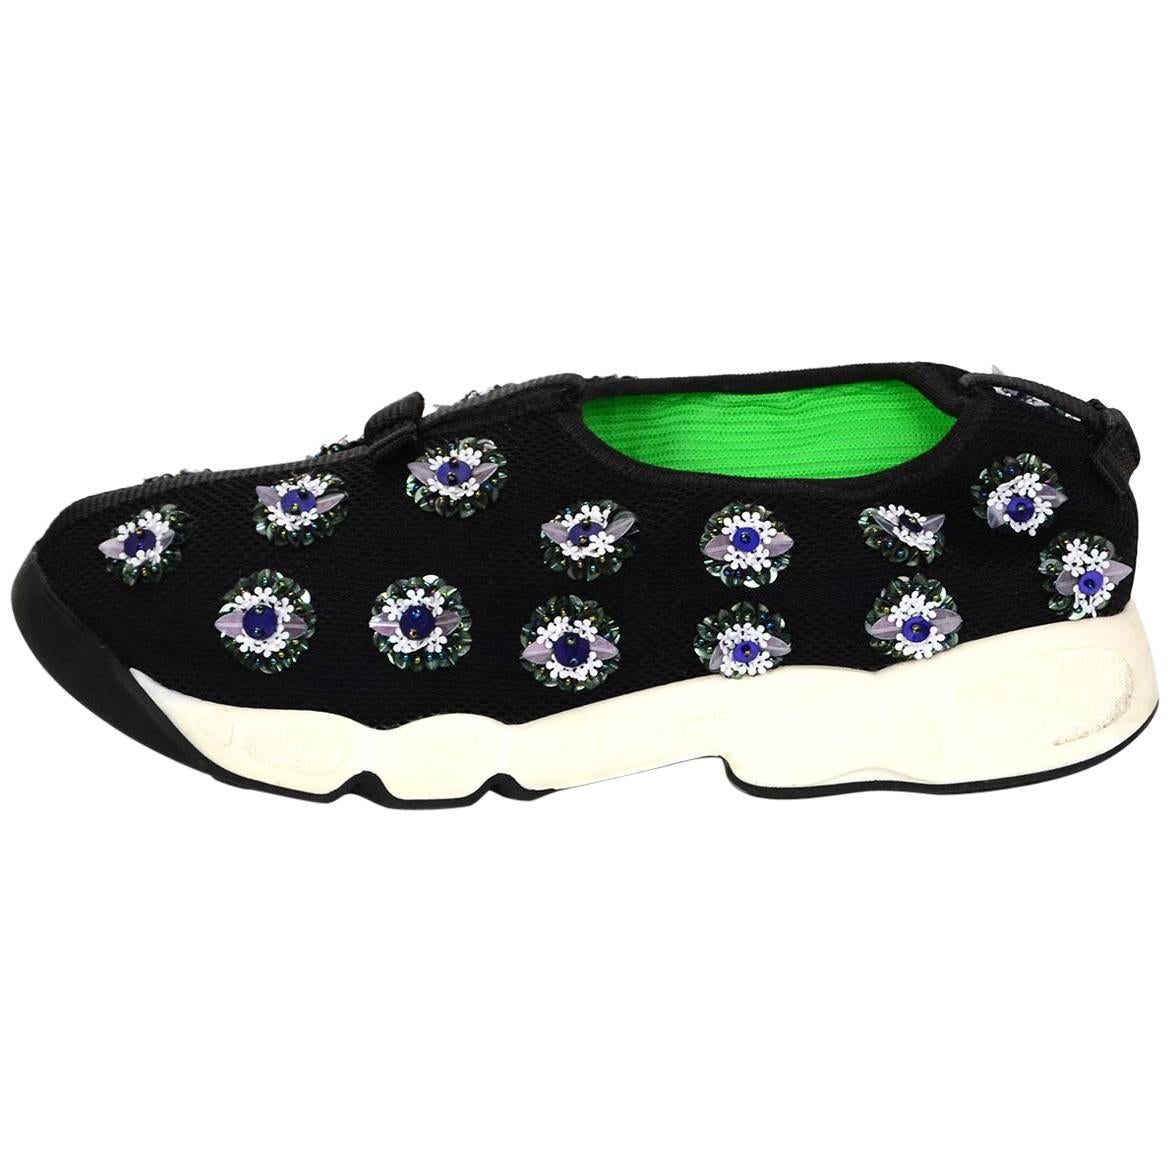 Christian Dior Black and White Floral Beaded Fusion Sneakers Sz 38.5